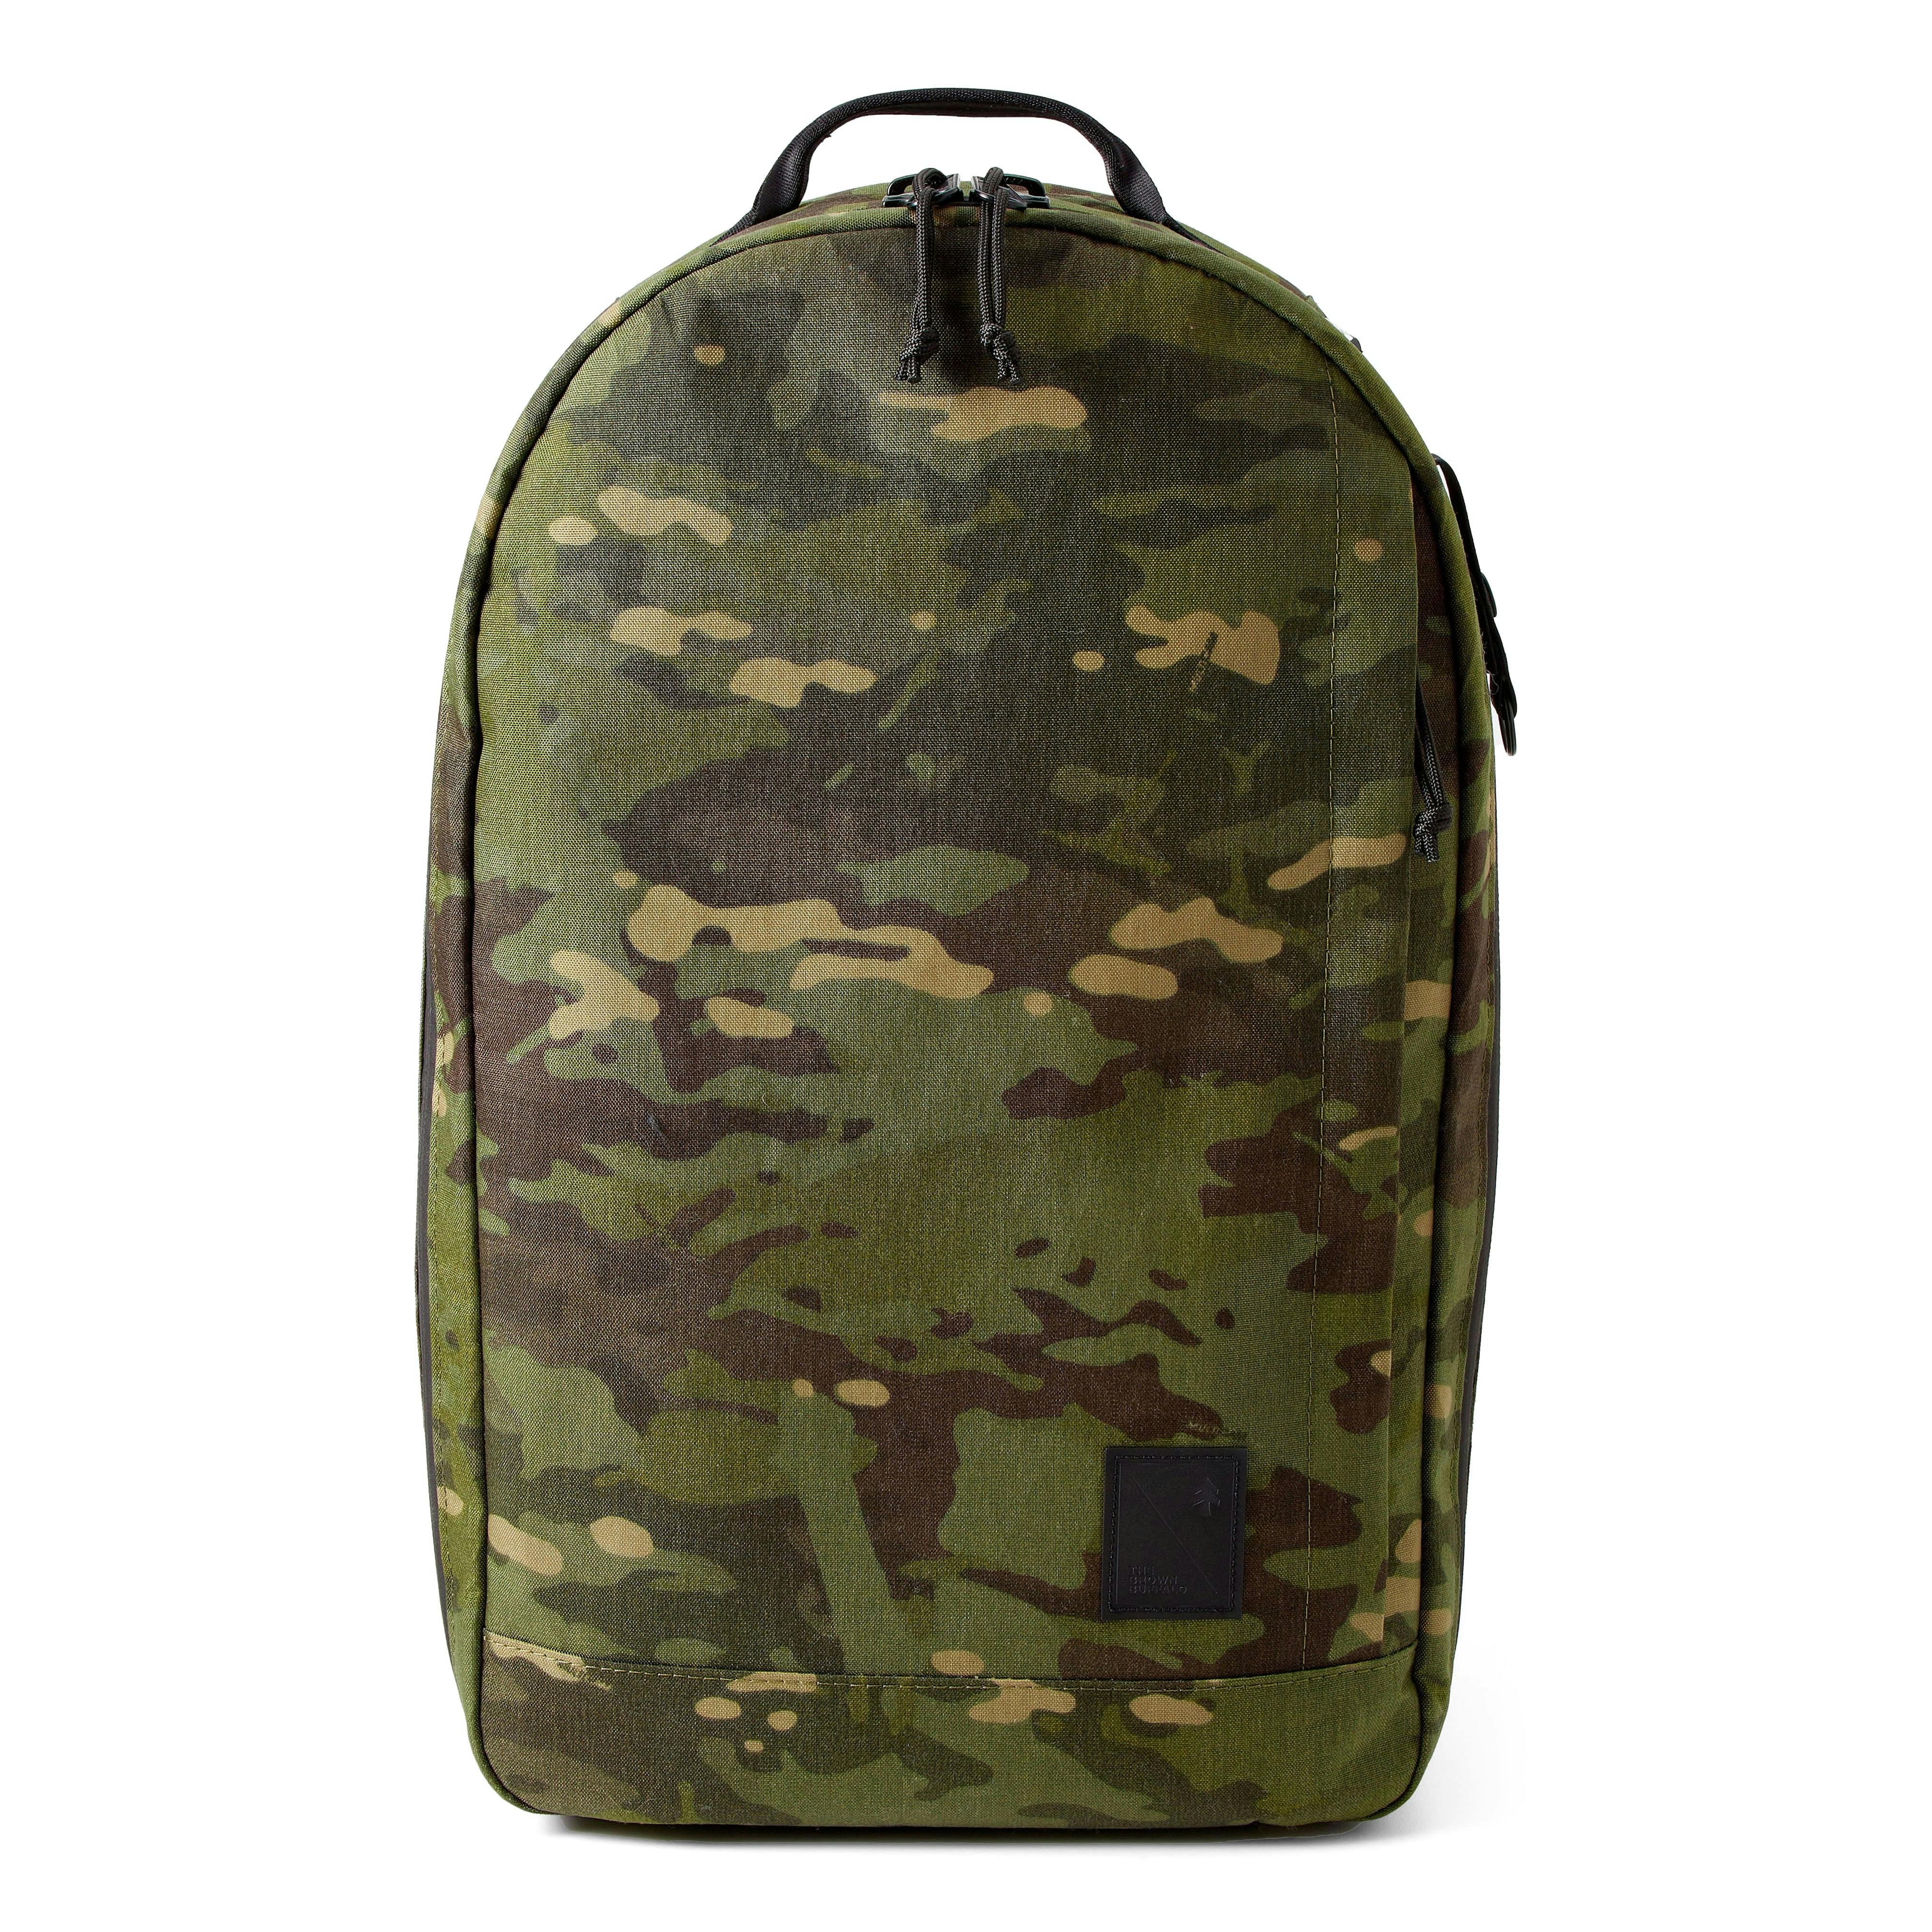 THE BROWN BUFFALO CONCEAL BACKPACK NAVY